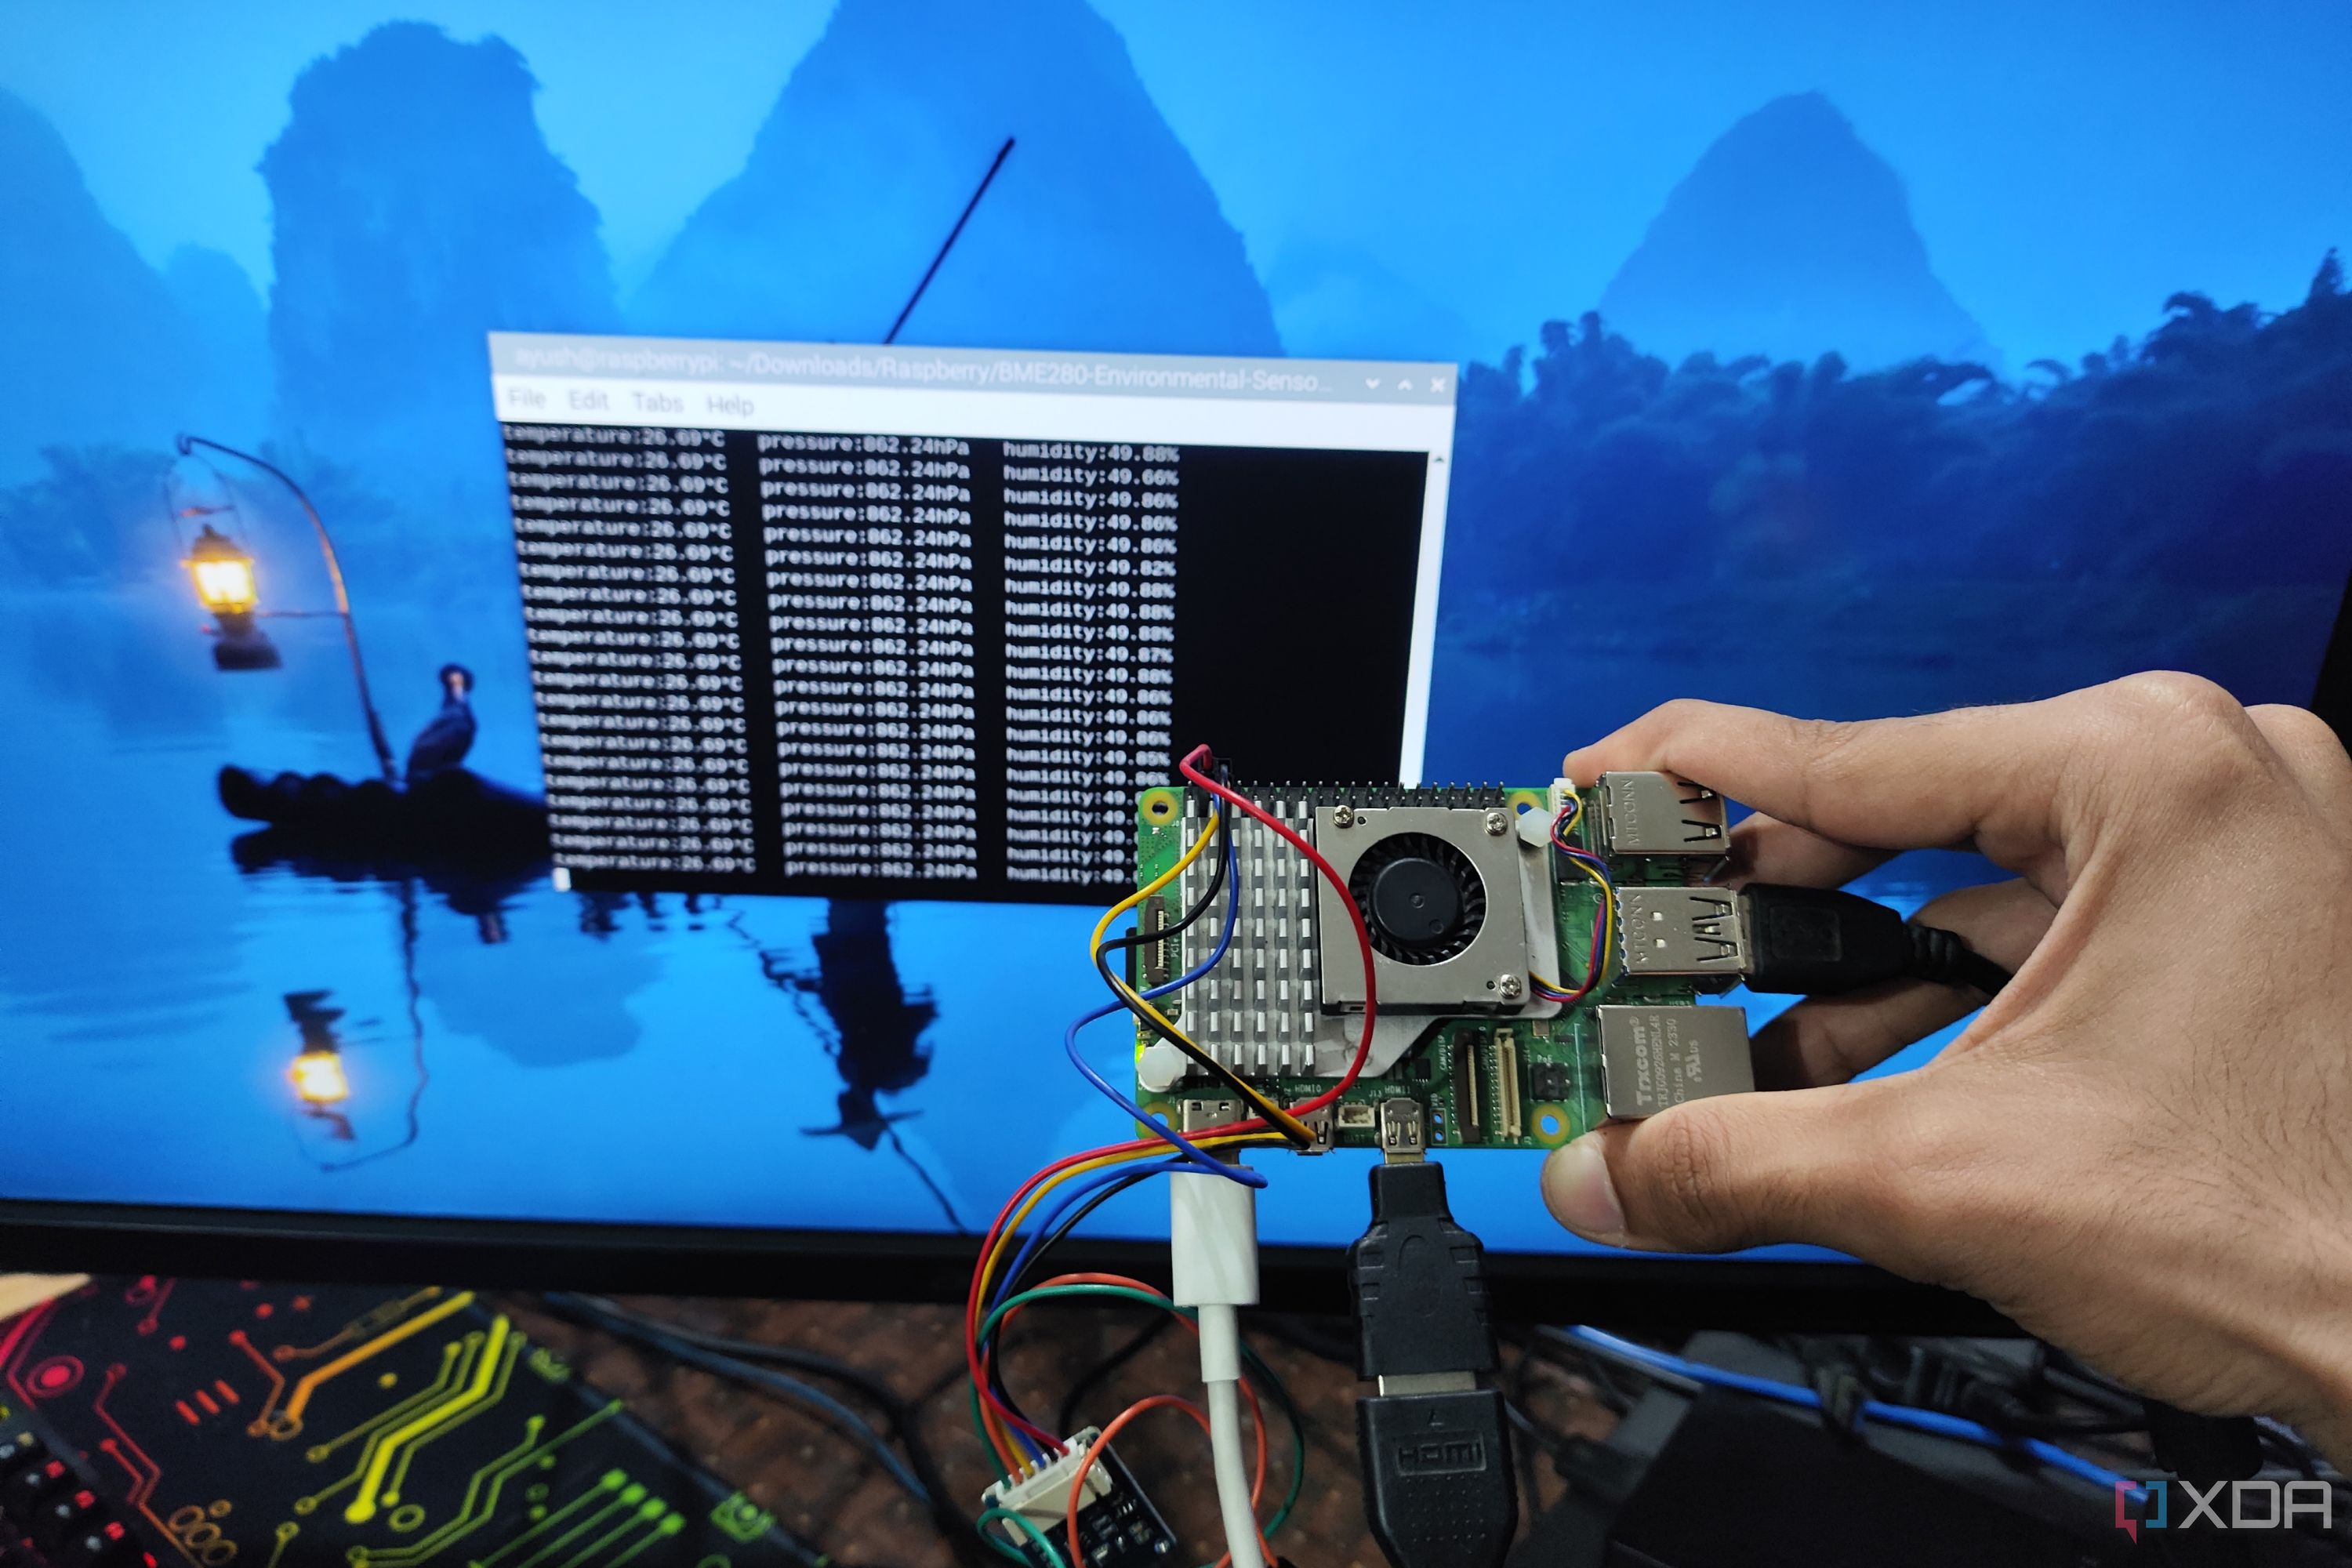 A person holding a Raspberry Pi 5 with a BME280 sensor attached to it in front of a screen